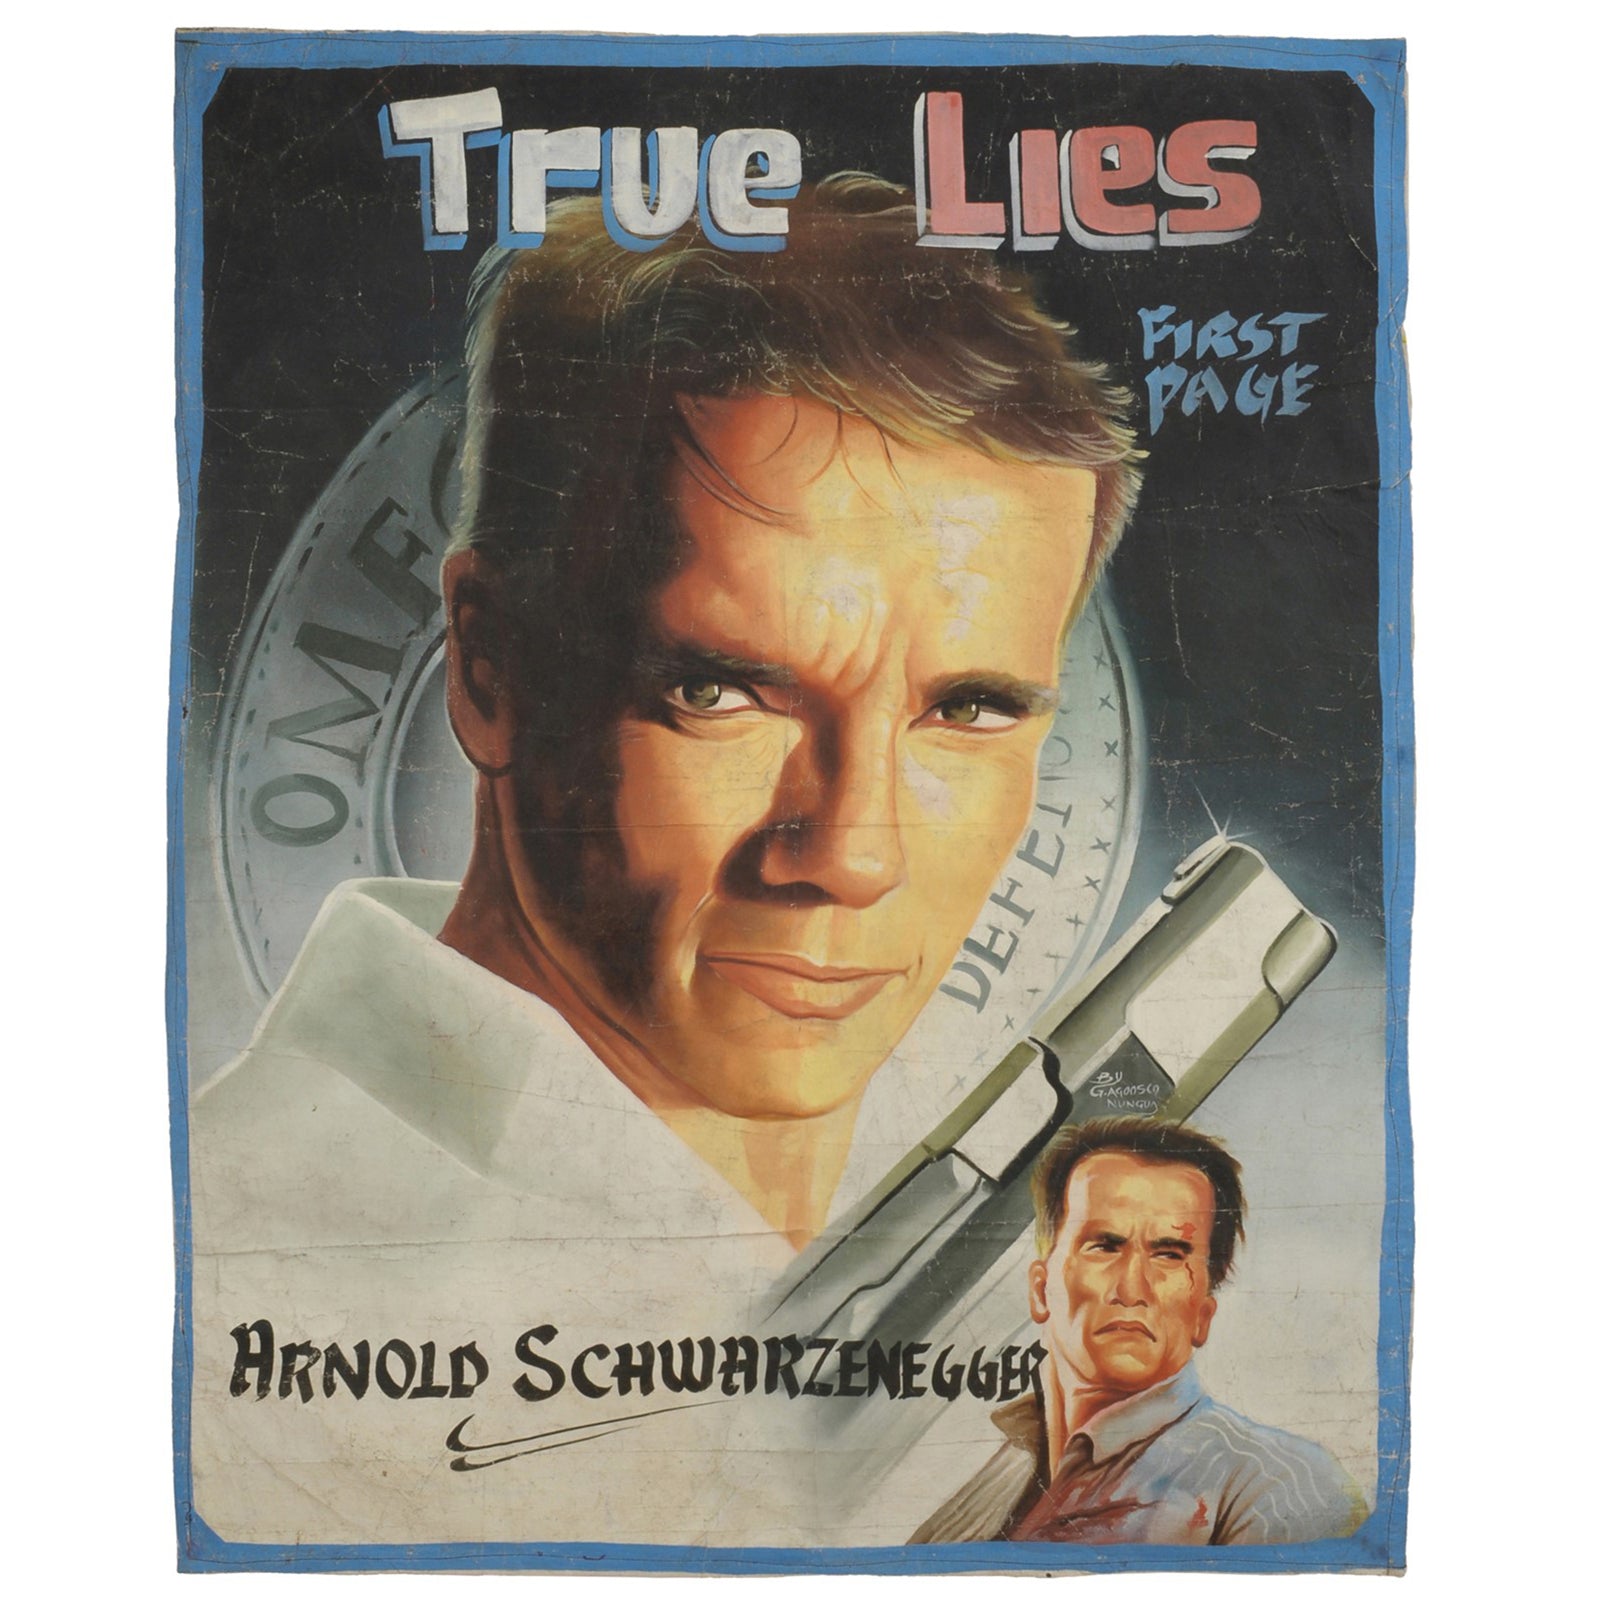 TRUE LIES MOVIE POSTER HAND PAINTED IN GHANA WEST AFRICA FOR THE LOCAL CINEMA